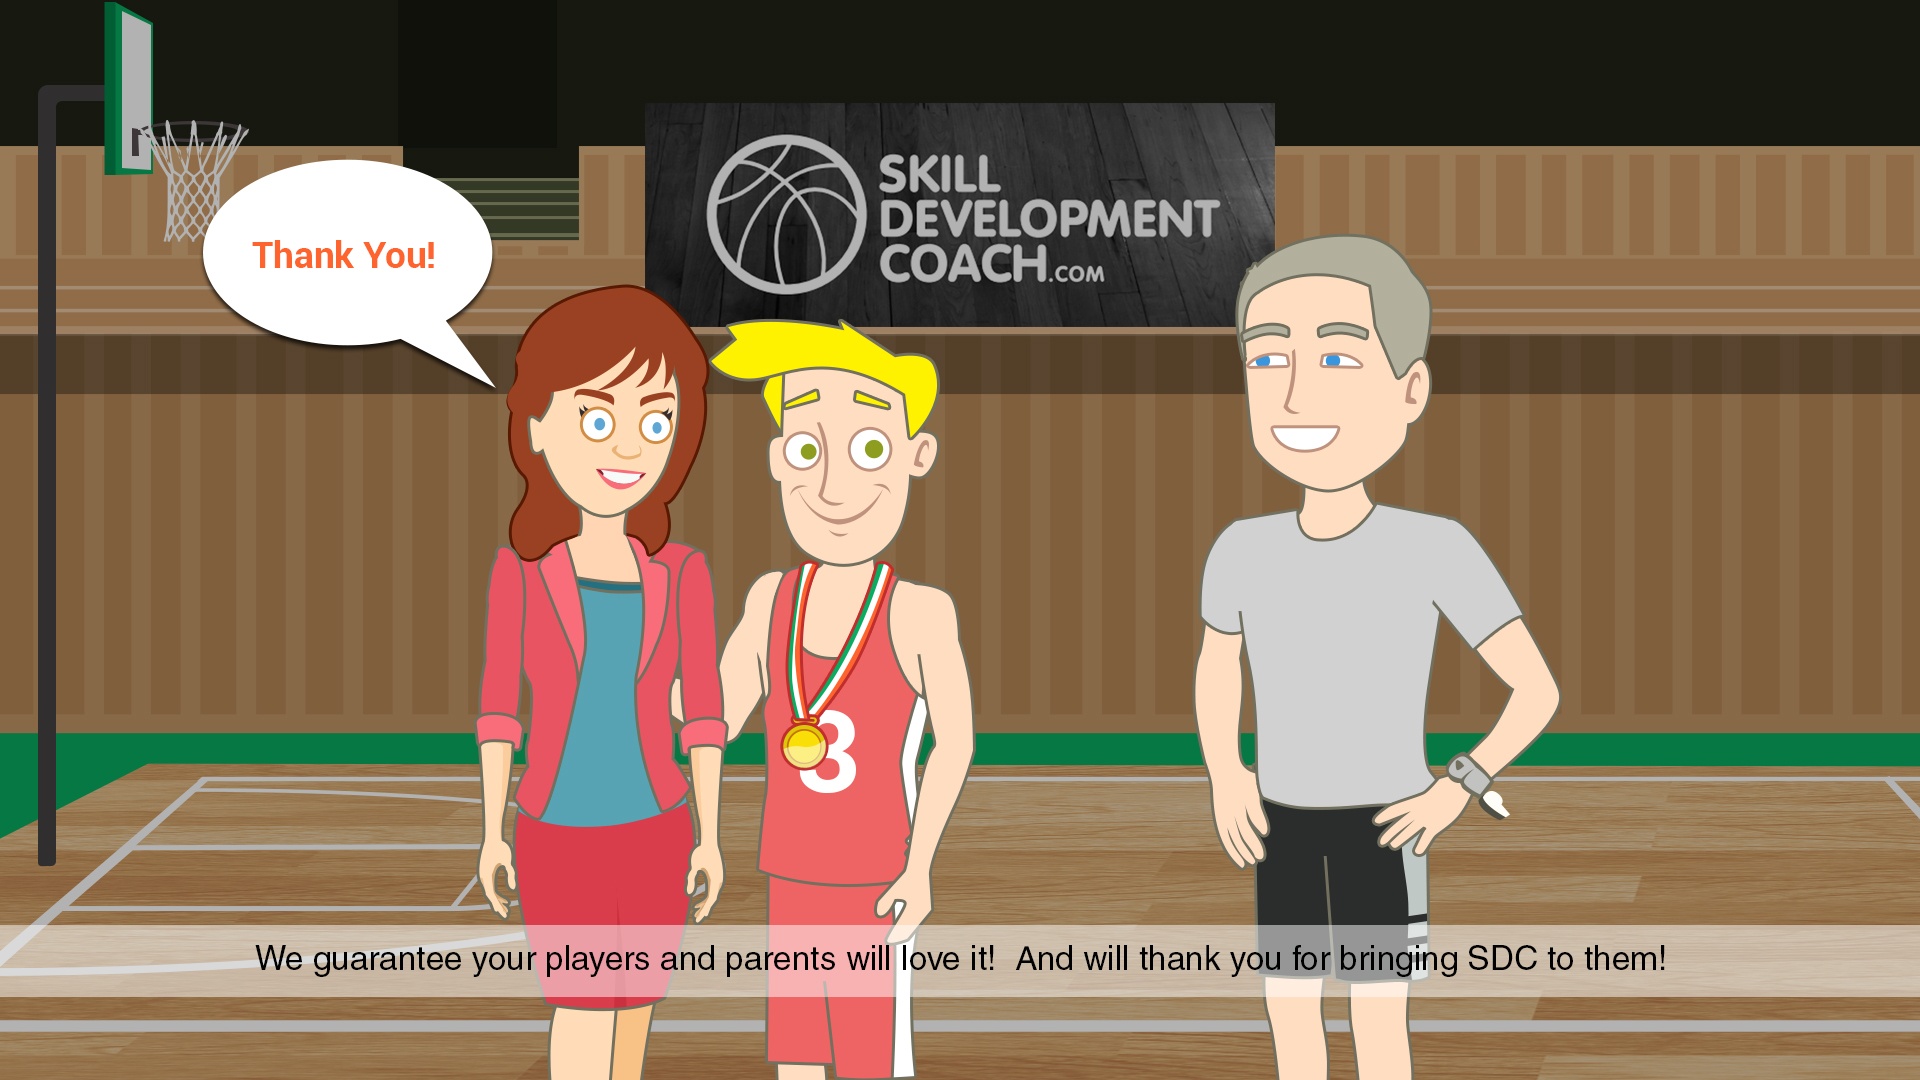 HOW TO BECOME A SKILL DEVELOPMENT COACH